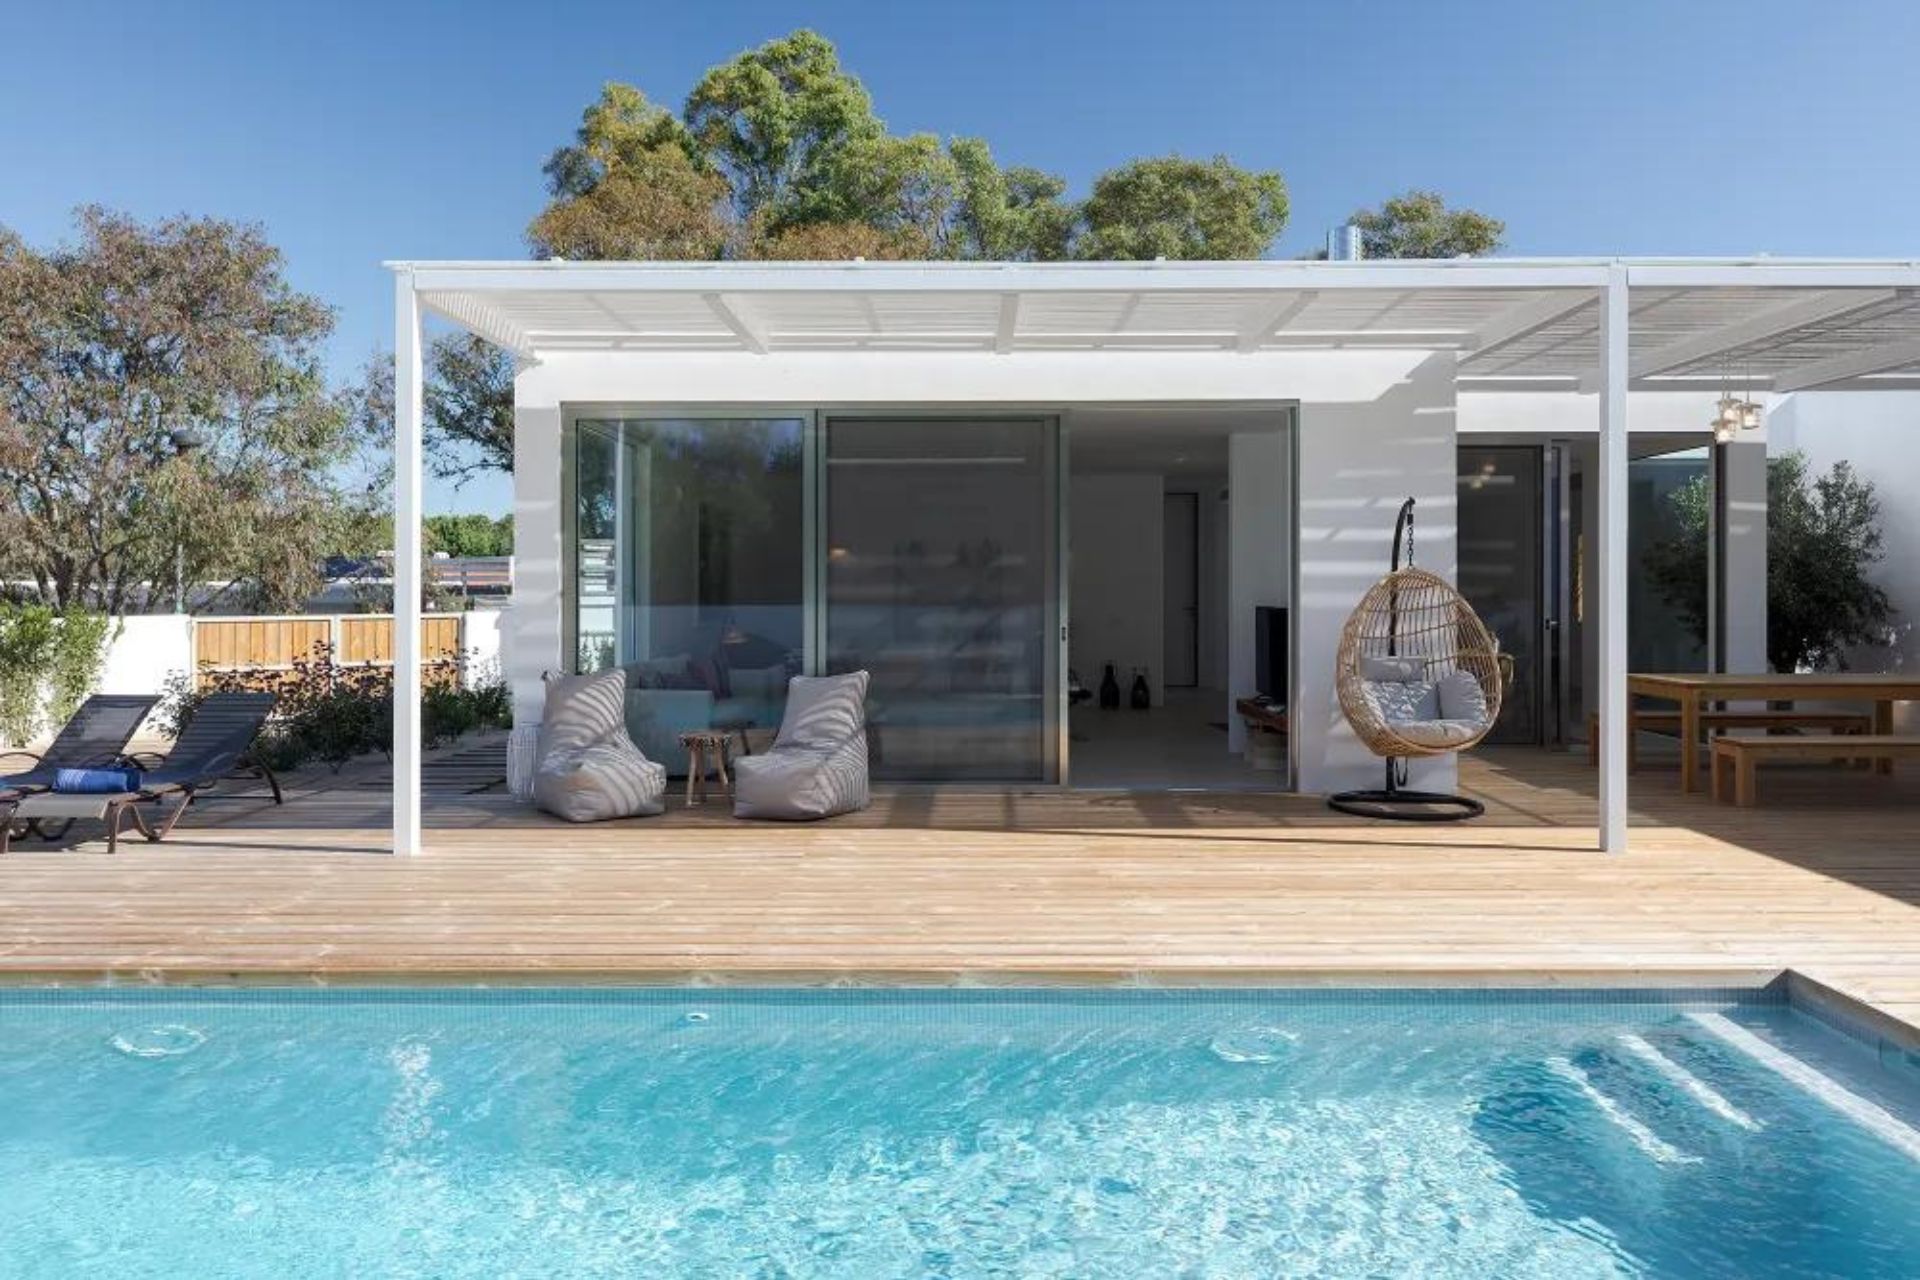 Villa in Portugal ©Airbnb Images